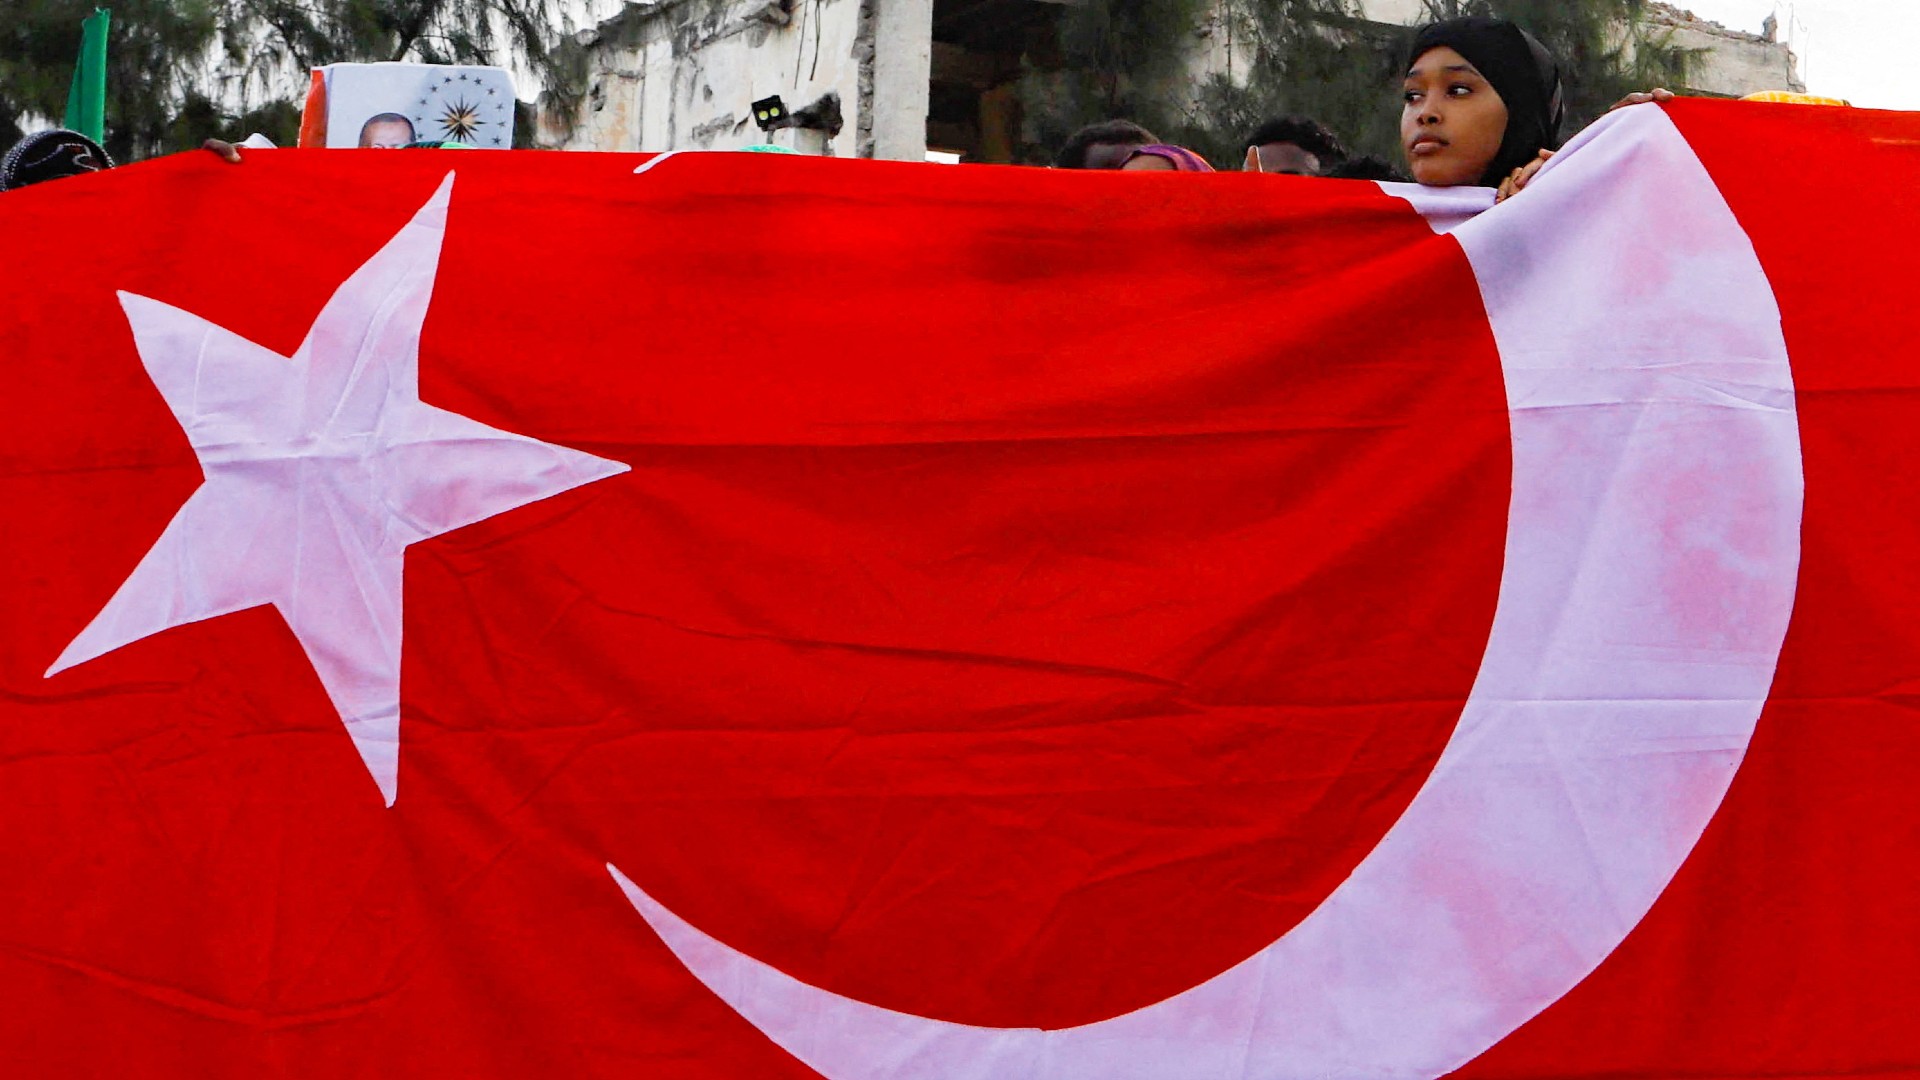 Somali supporters of Recep Tayyip Erdogan hold Turkey's flag during celebrations after the presidential election, in Mogadishu 29 May 2023 (Reuters/Feisal Omar)